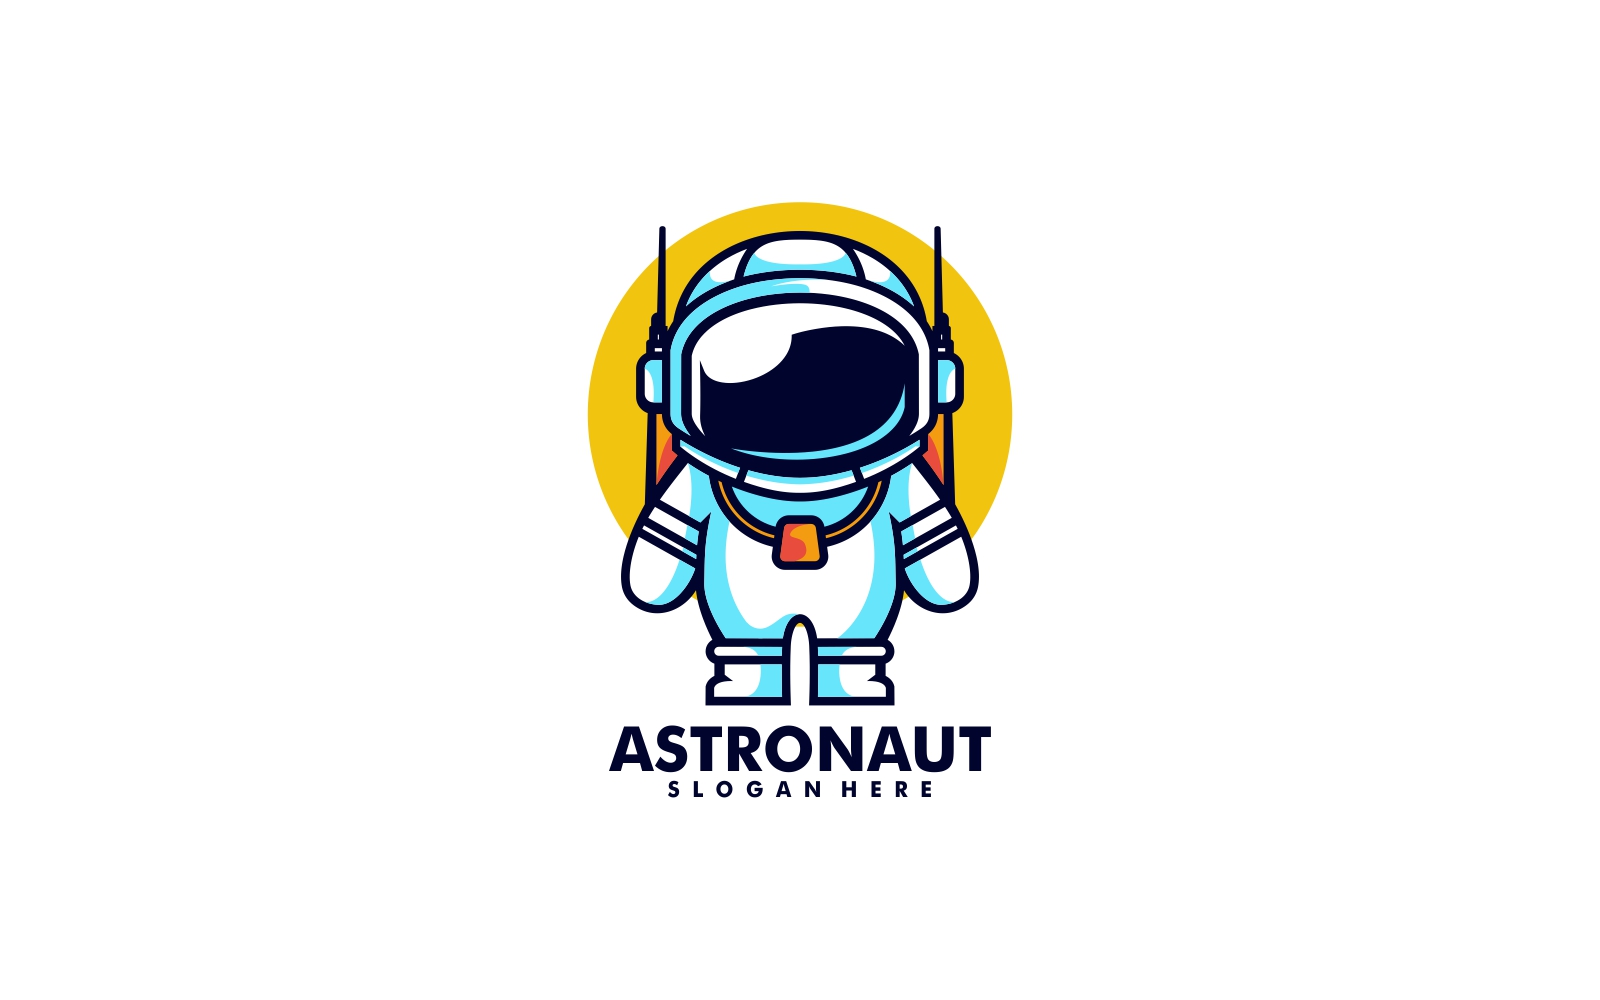 Astronaut logo ready to use Royalty Free Vector Image